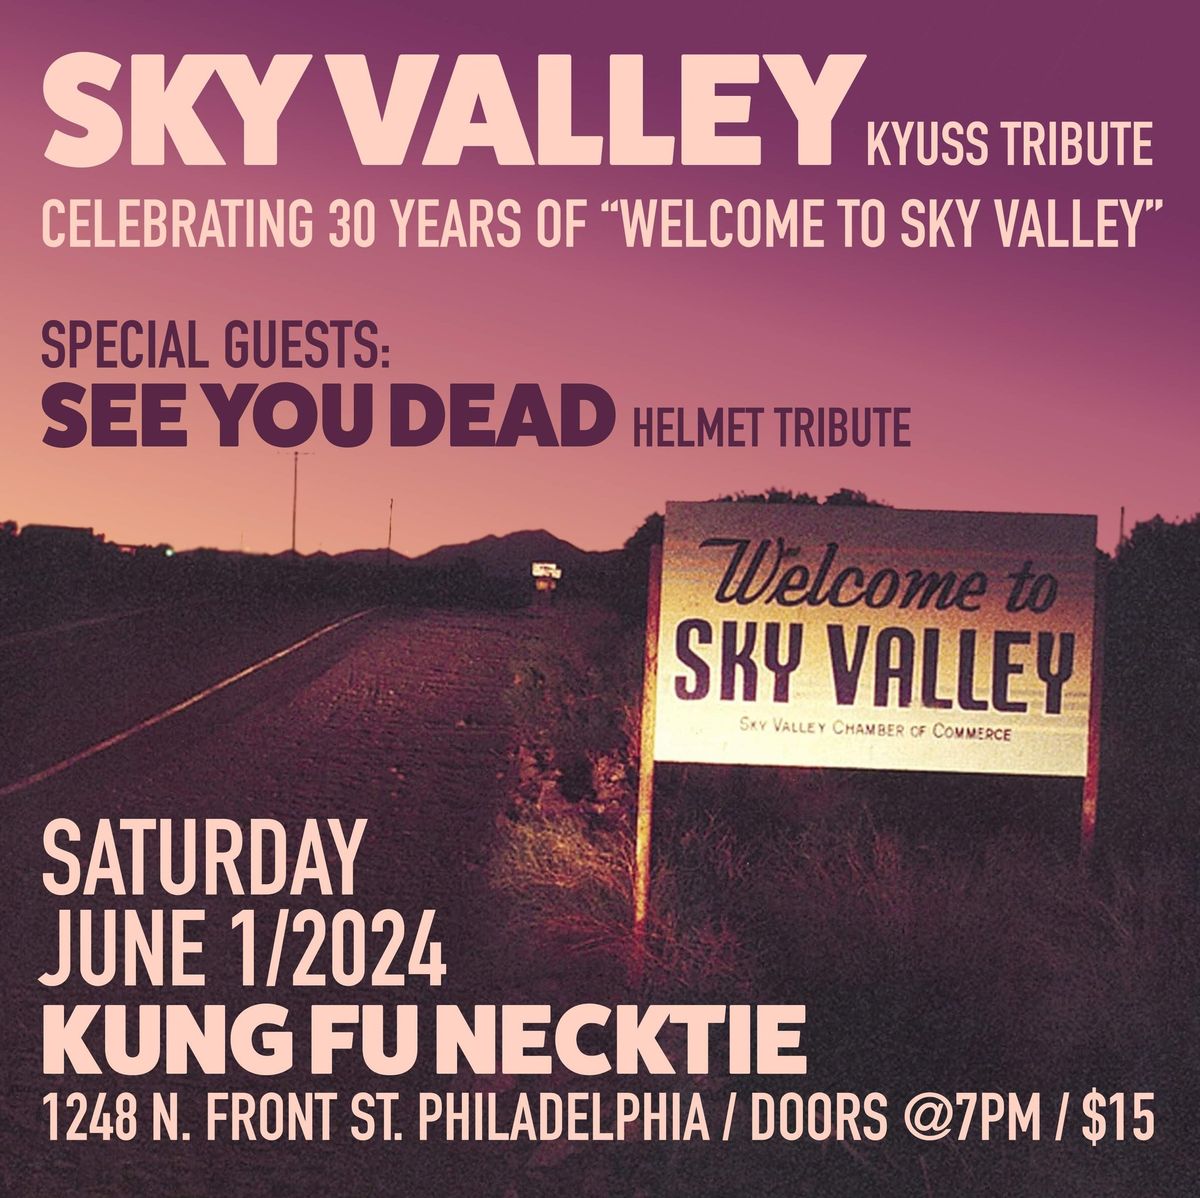 Sky Valley - Kyuss Tribute - Welcome to Sky Valley 30th, guest See You Dead - Helmet Tribute